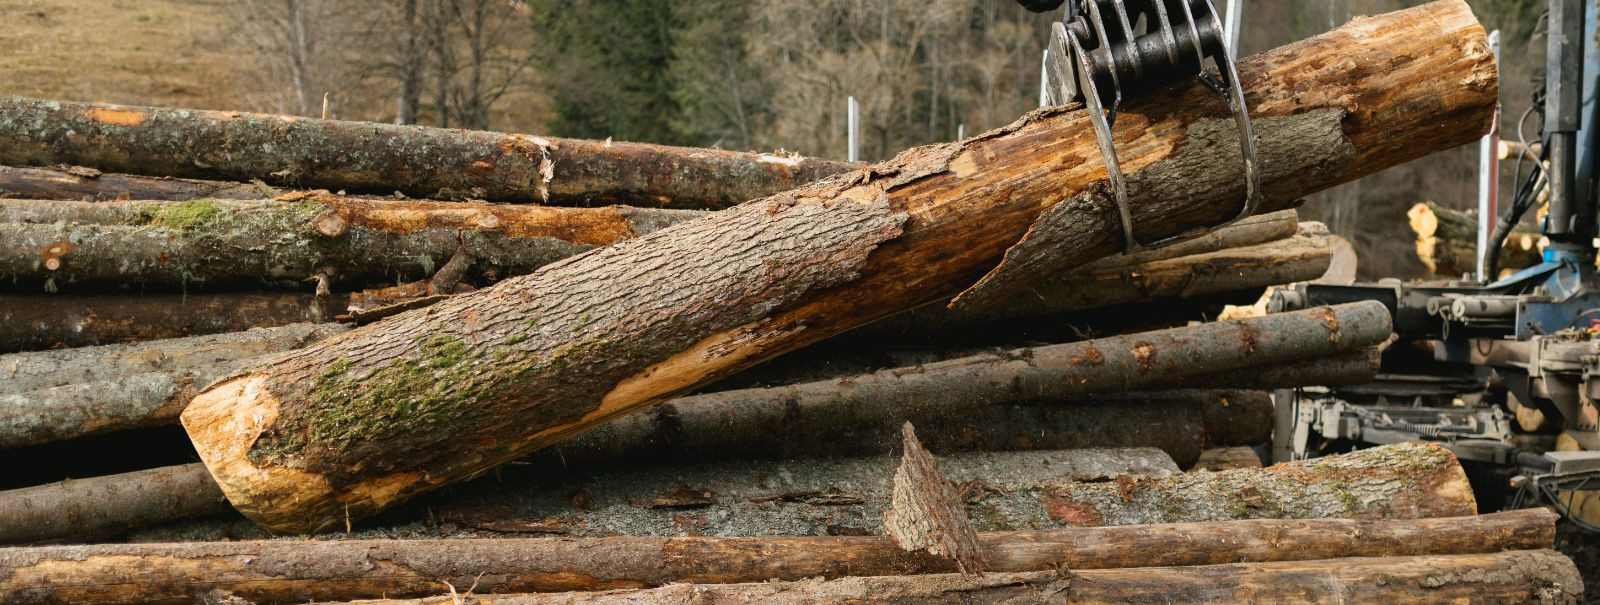 Chopwood services, commonly known as logging or timber harvesting, are essential for meeting the global demand for wood products. However, when not managed resp